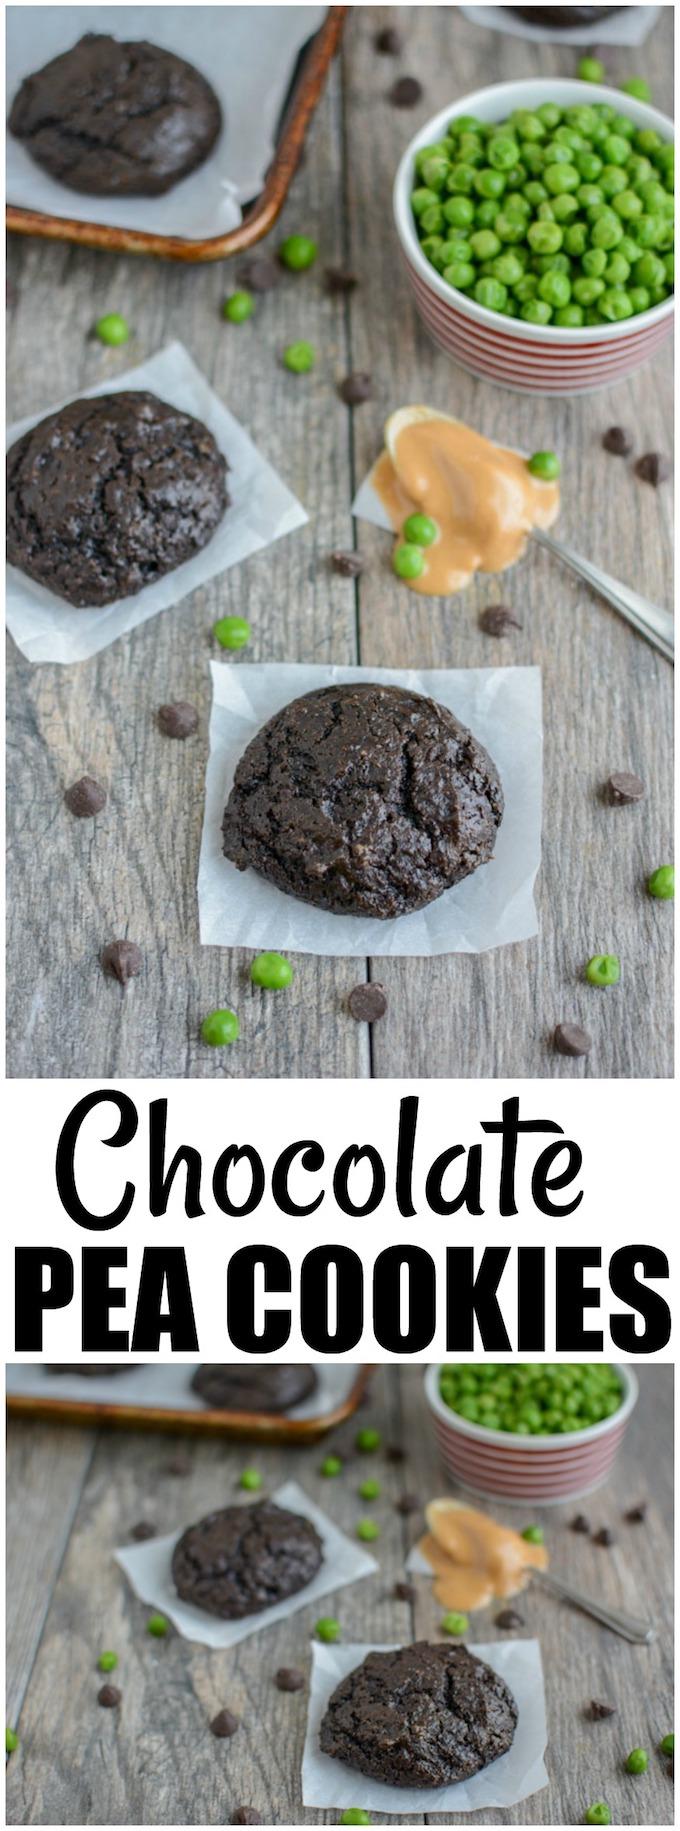 These healthy Chocolate Pea Cookies are packed full of a green vegetable and you'd never know it! They're kid-friendly and make a great breakfast or snack.